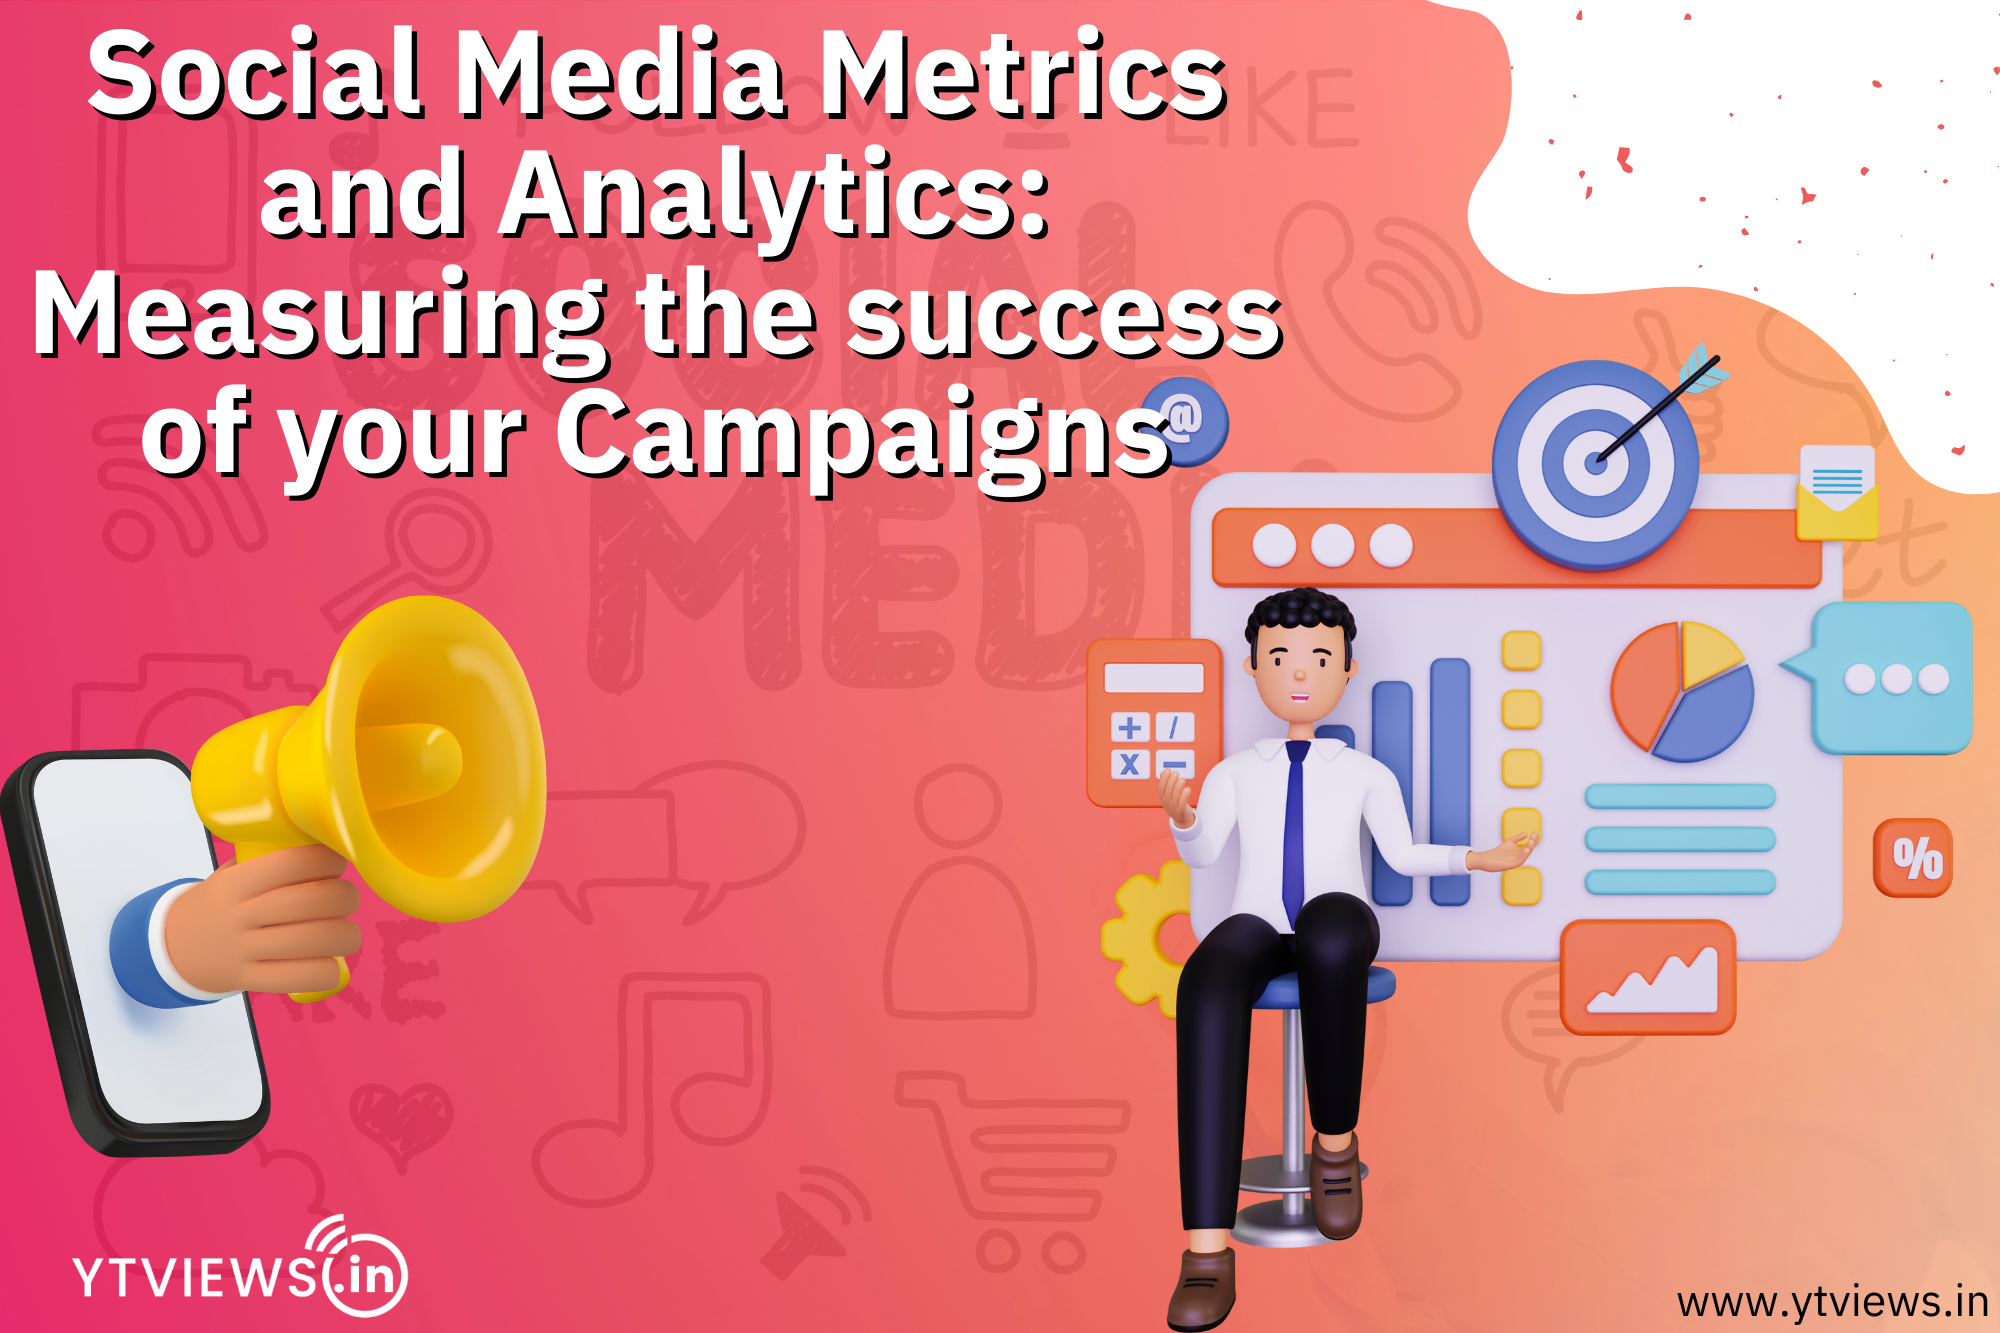 Social media metrics and analytics: measuring the success of your campaigns